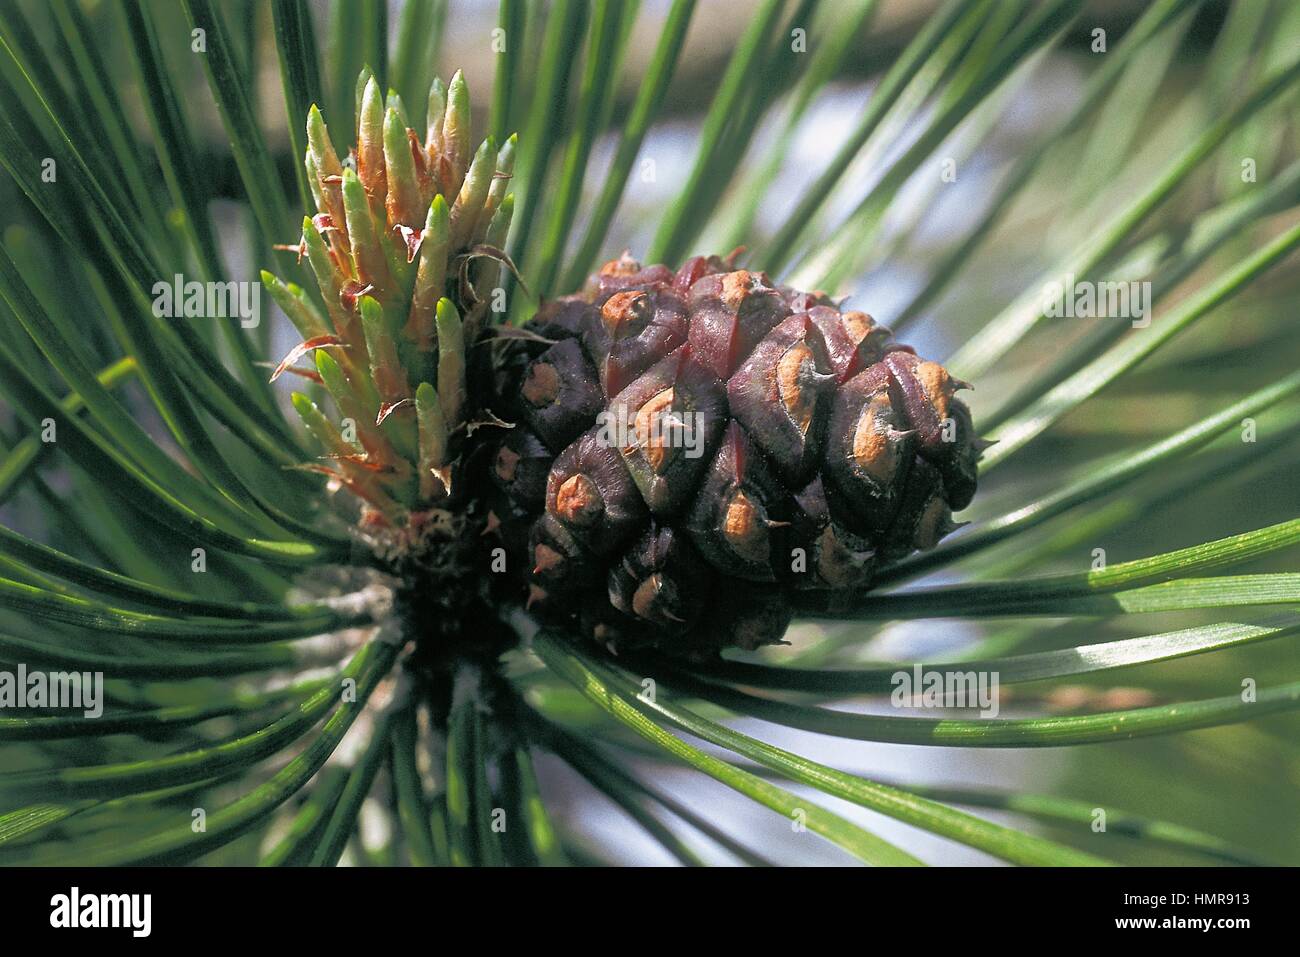 Leaves and strobilus of the Japanese Black Pine (Pinus thunbergii), Pinaceae. Stock Photo